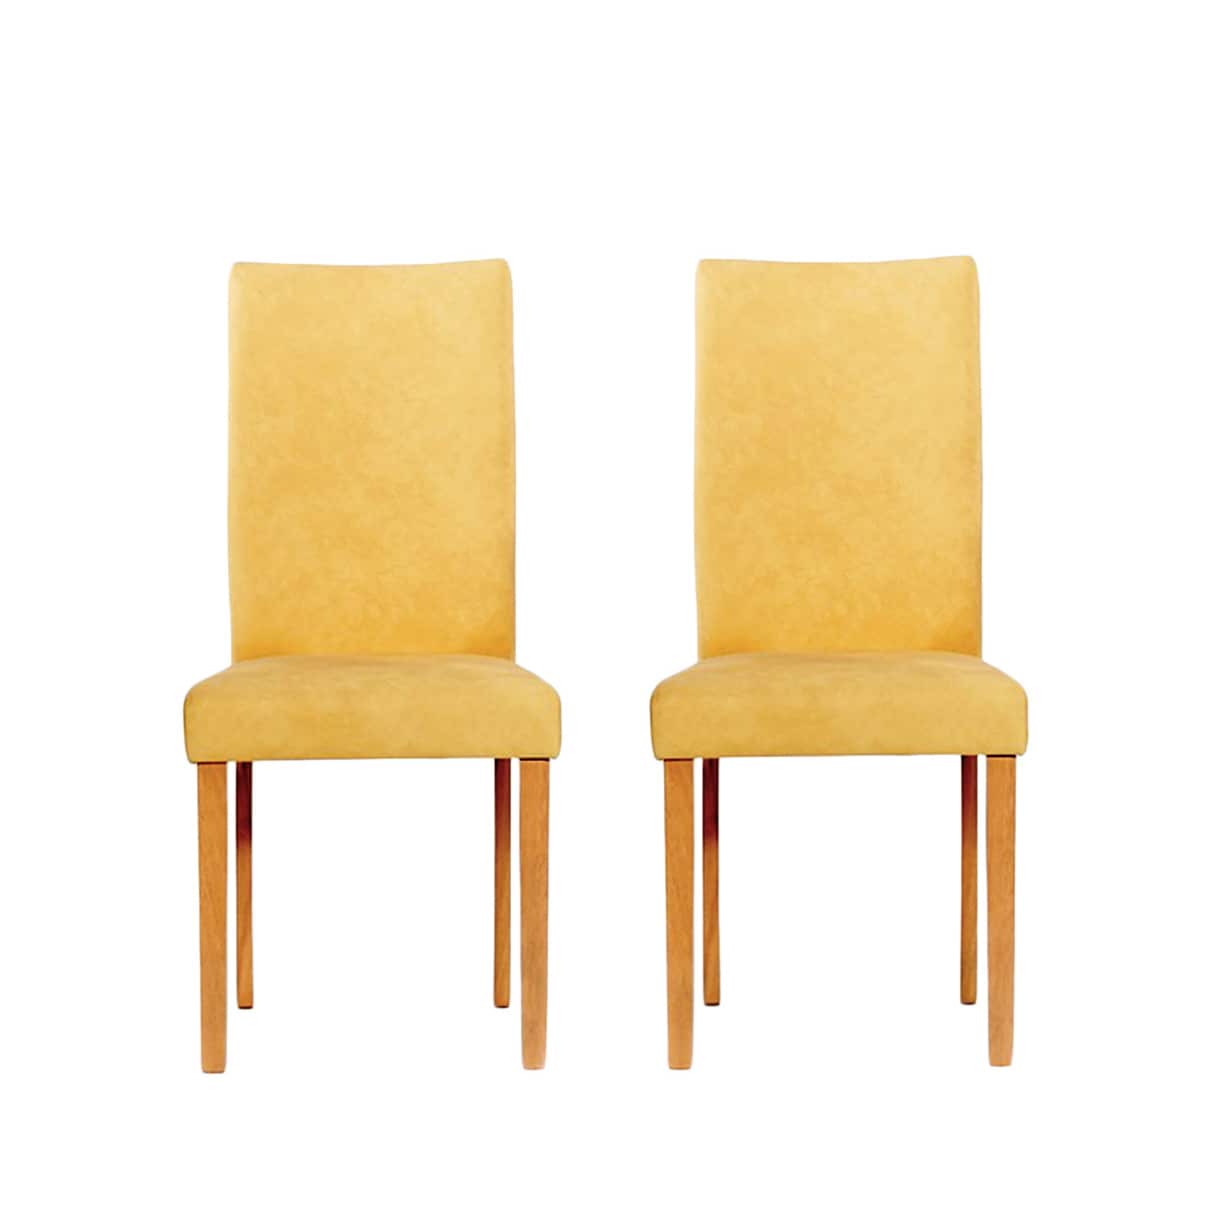 Warehouse Of Tiffany Shino Mustard Faux Leather Chairs (set Of 8)